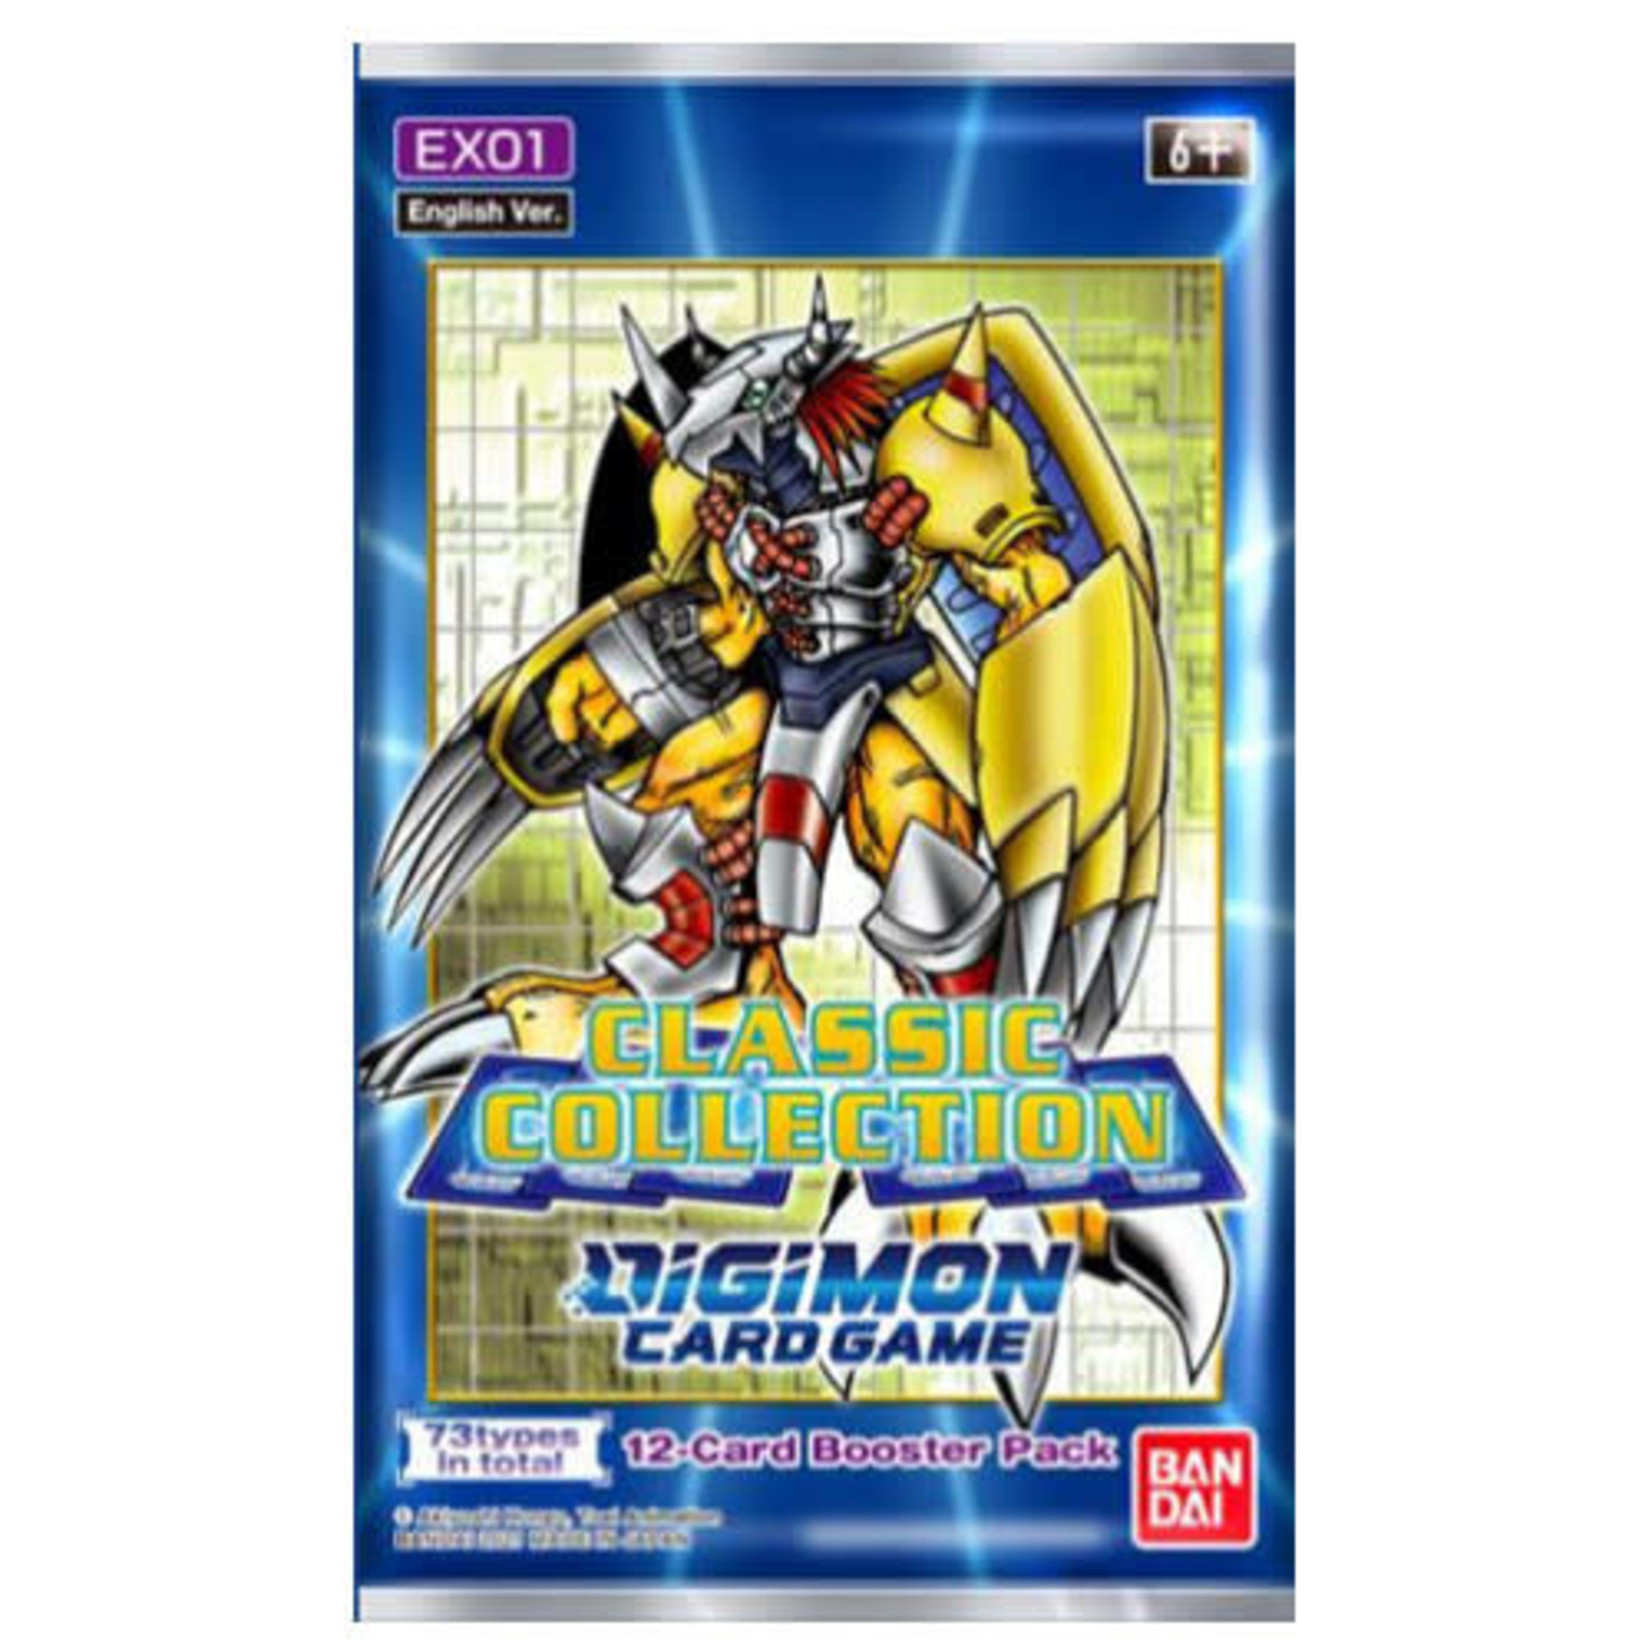 Digimon: Classic Collection Booster Pack (EX01)